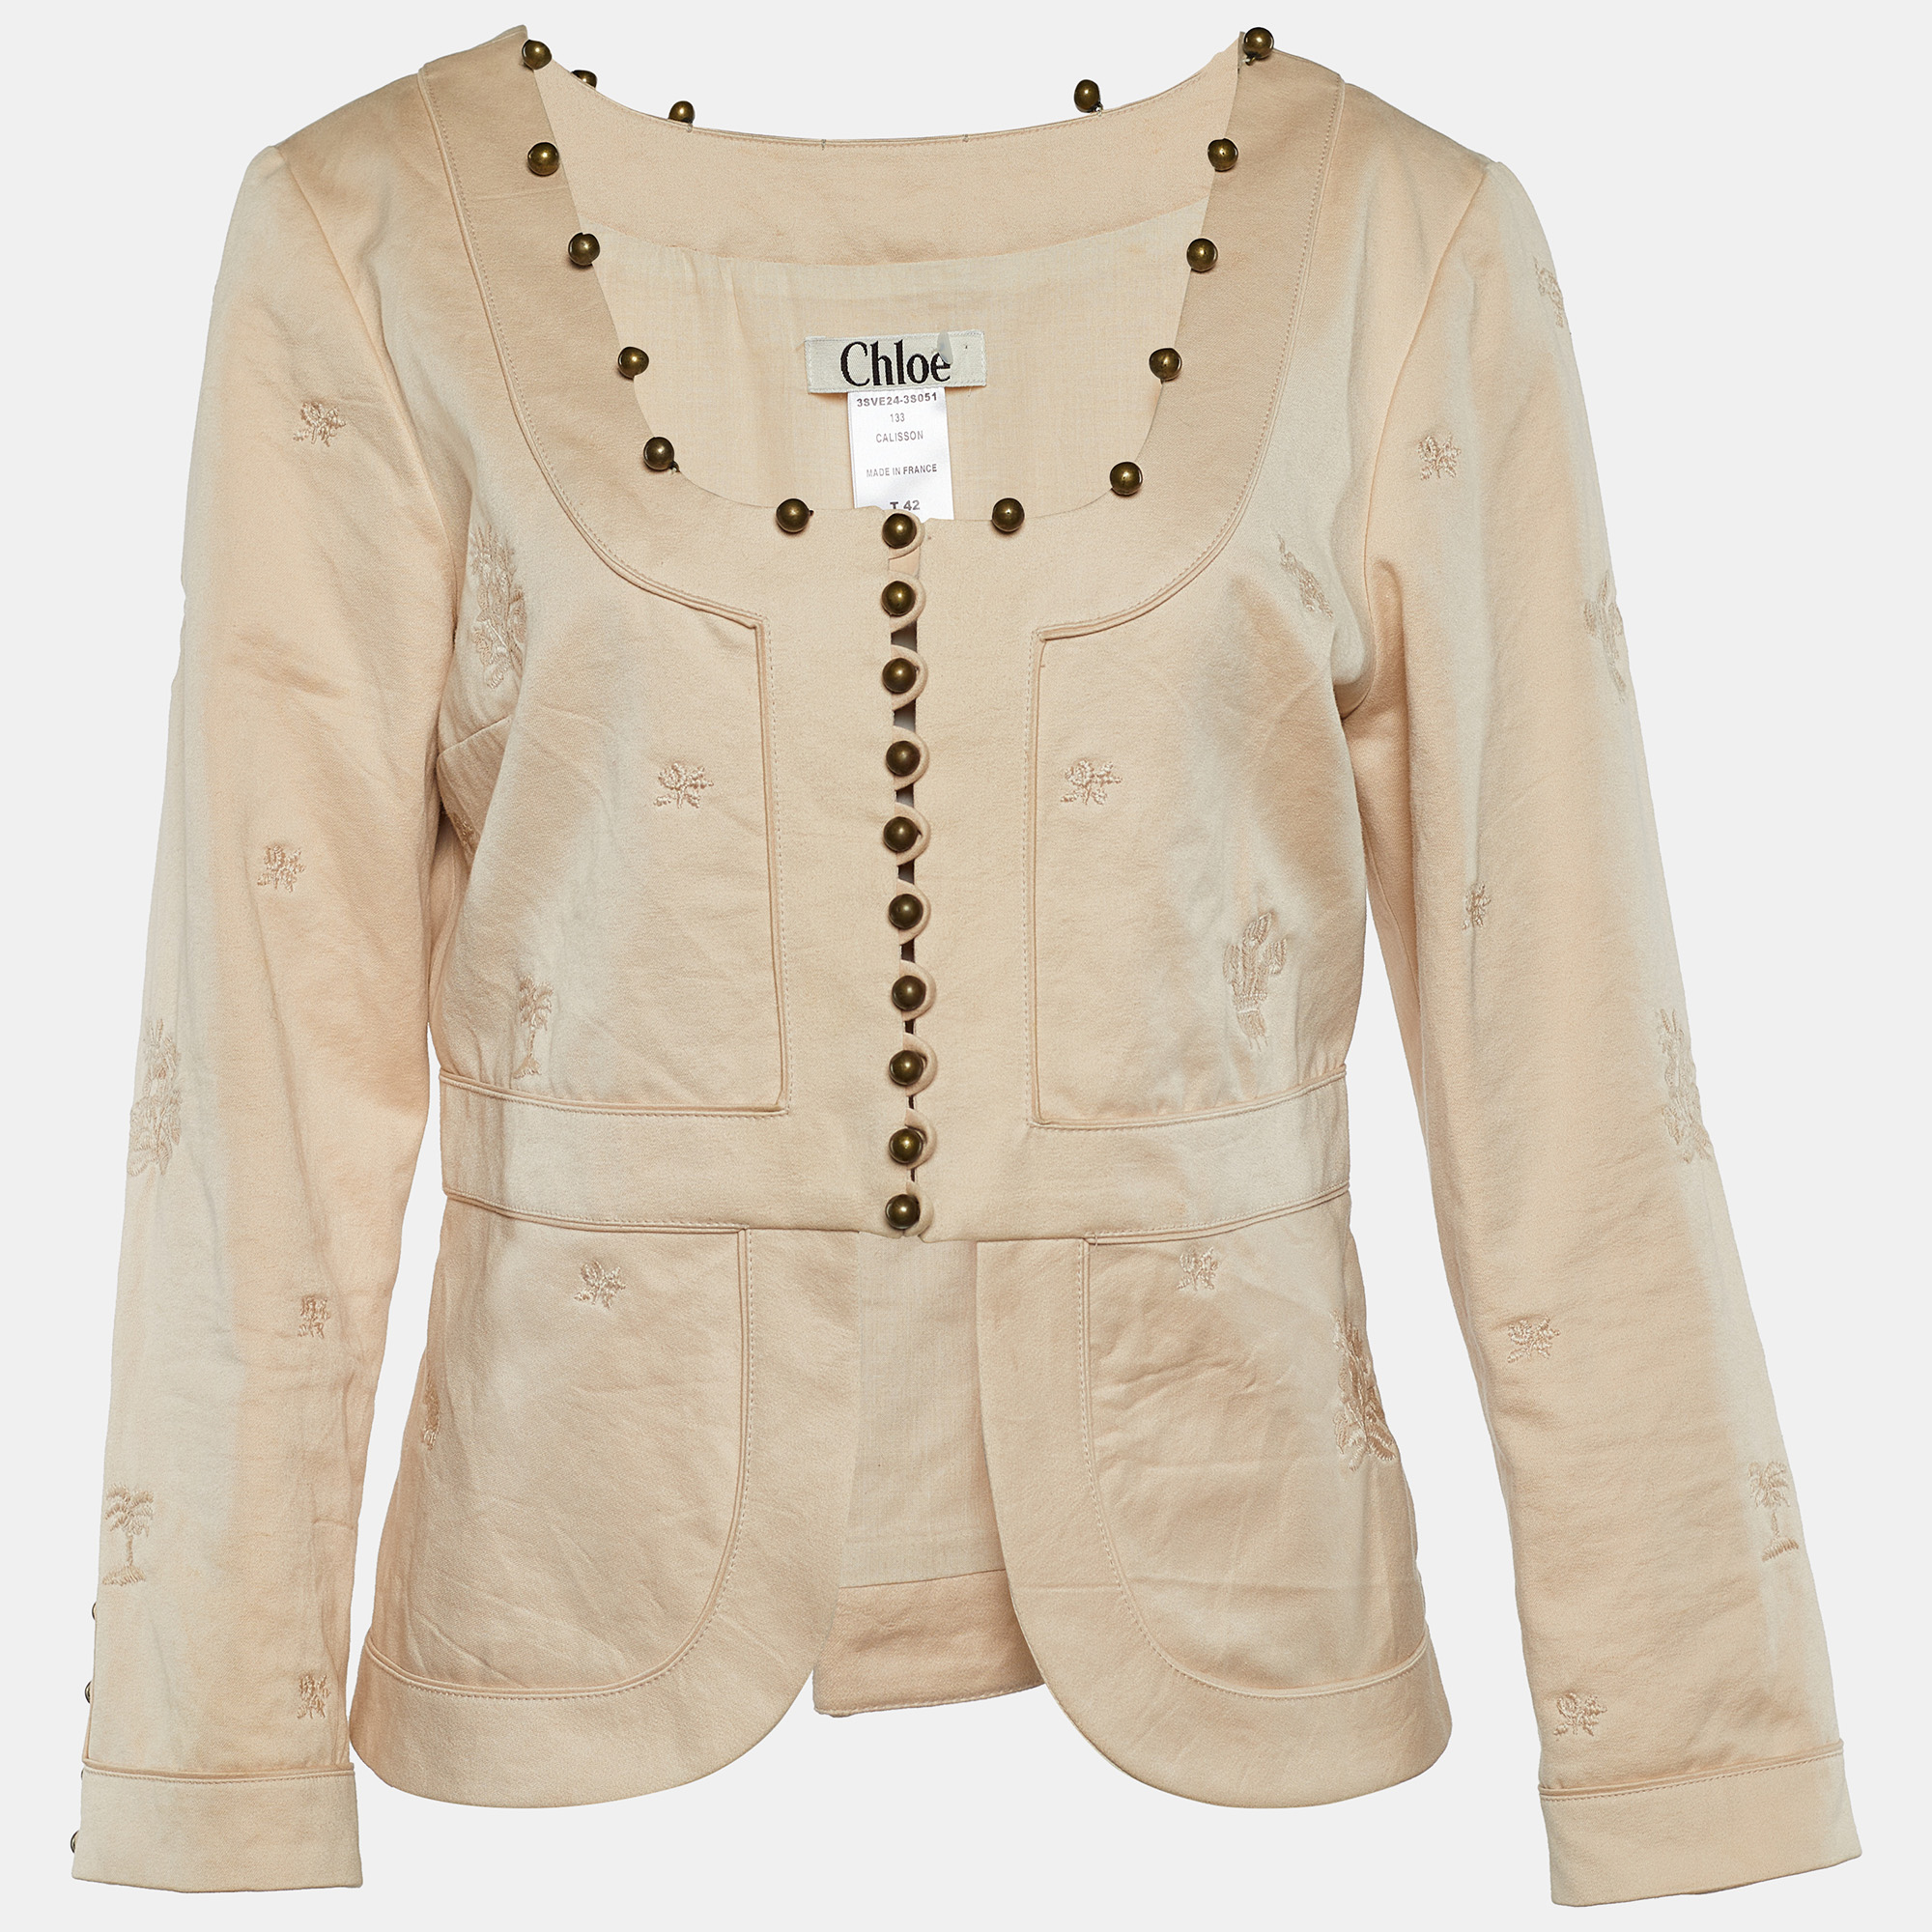 Chloe beige cotton embroidered button front top l